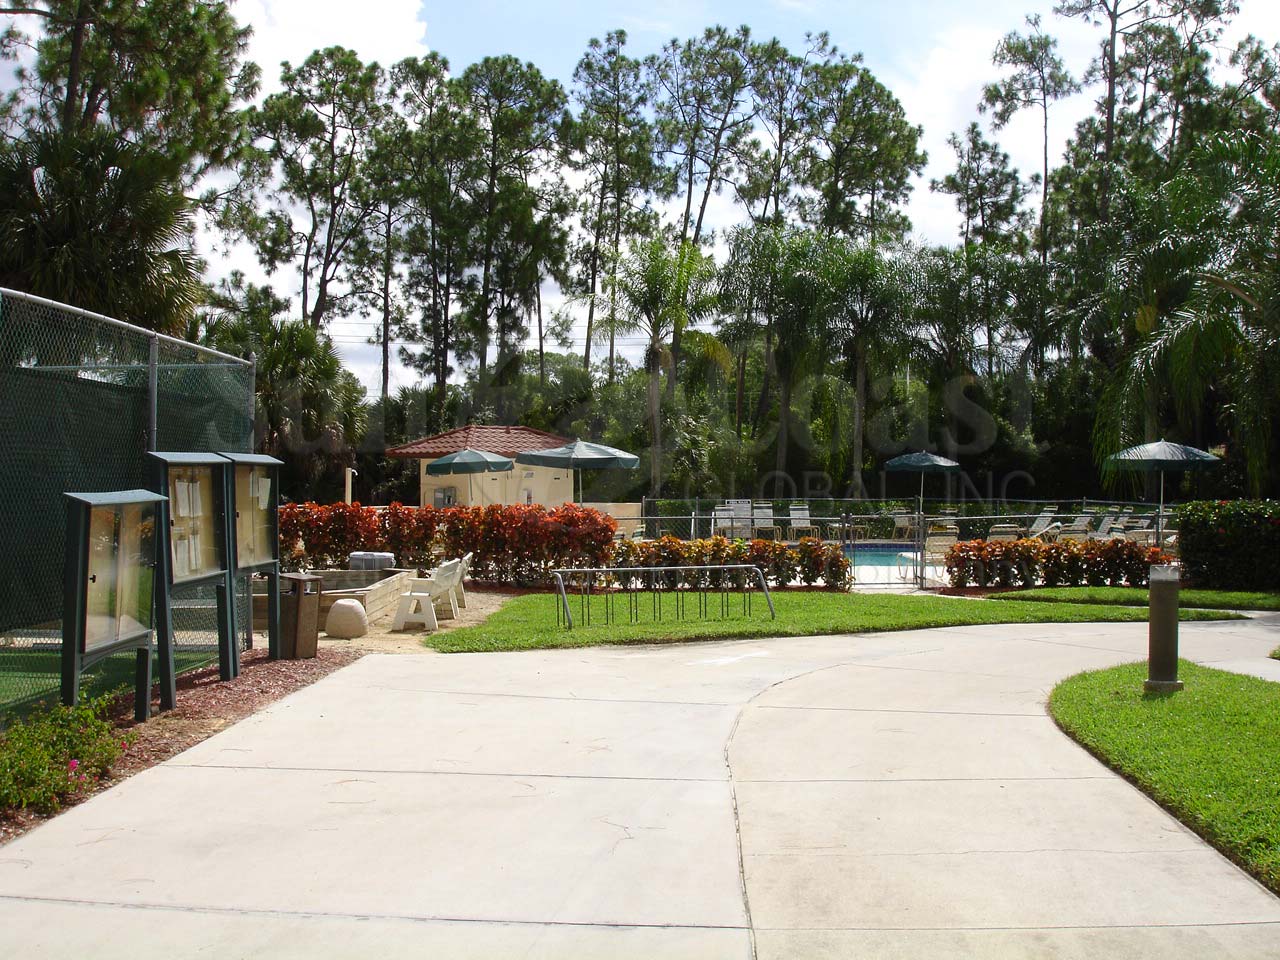 ROYAL WOOD Golf and Country Club 3-6 foot community pool and tennis courts